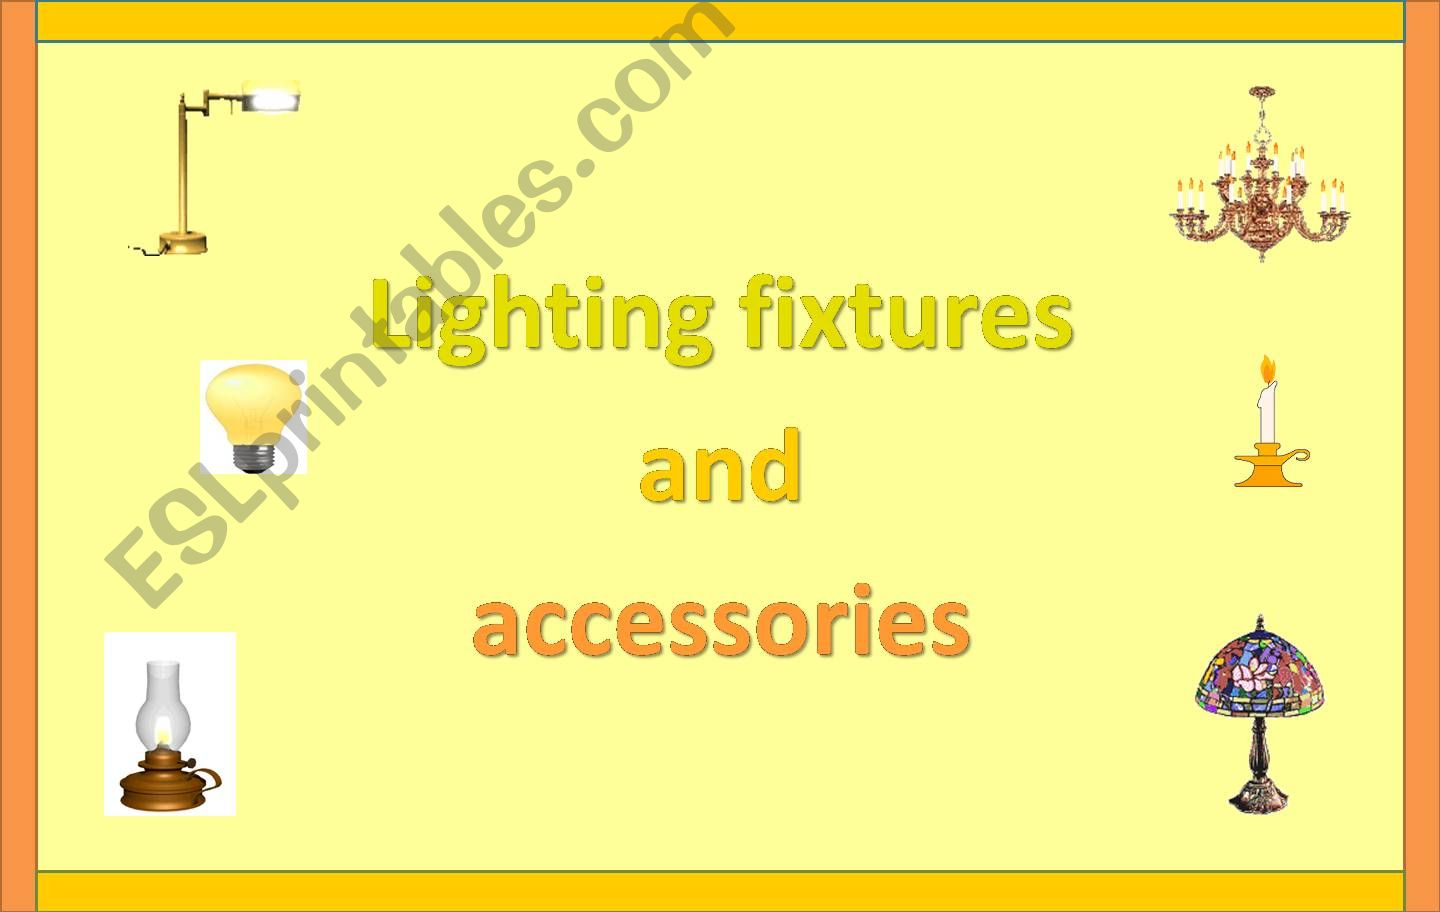 House: Lighting fixtures and accessories